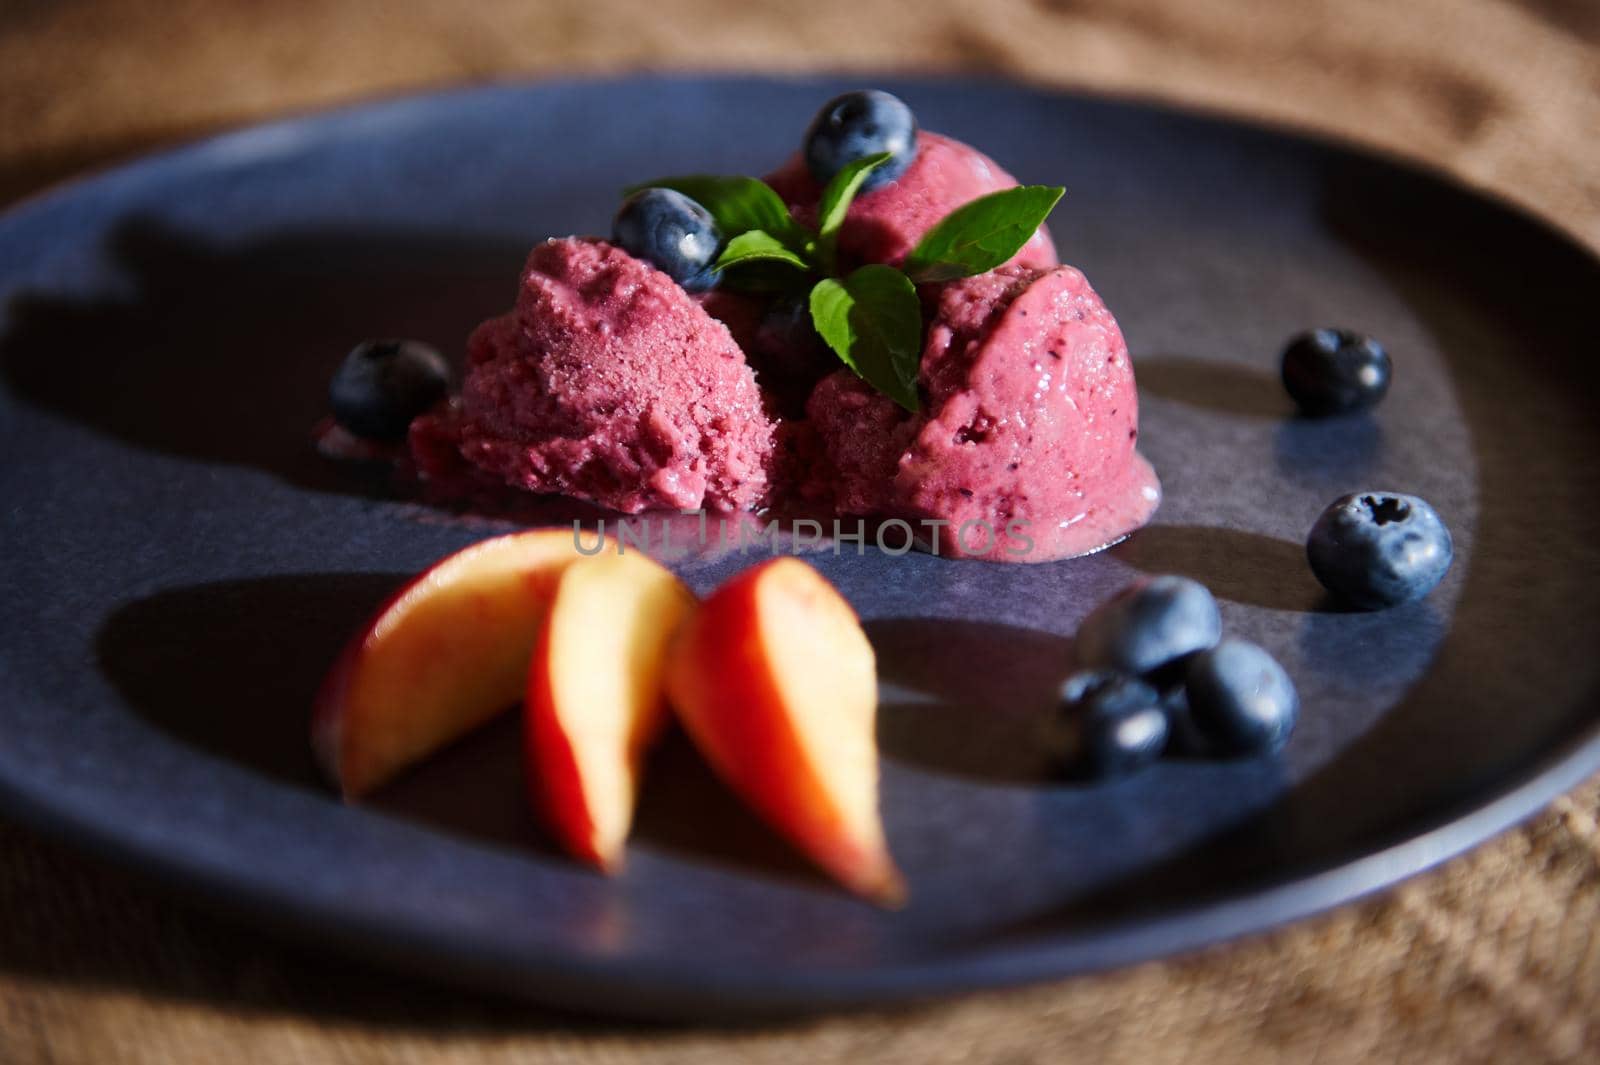 Food still life. Fresh delicious vegan ice cream of ripe organic blueberries, melting on a navy blue plate, decorated with mint and lemon basil leaves, ripe juicy peaches. Healthy homemade sorbet